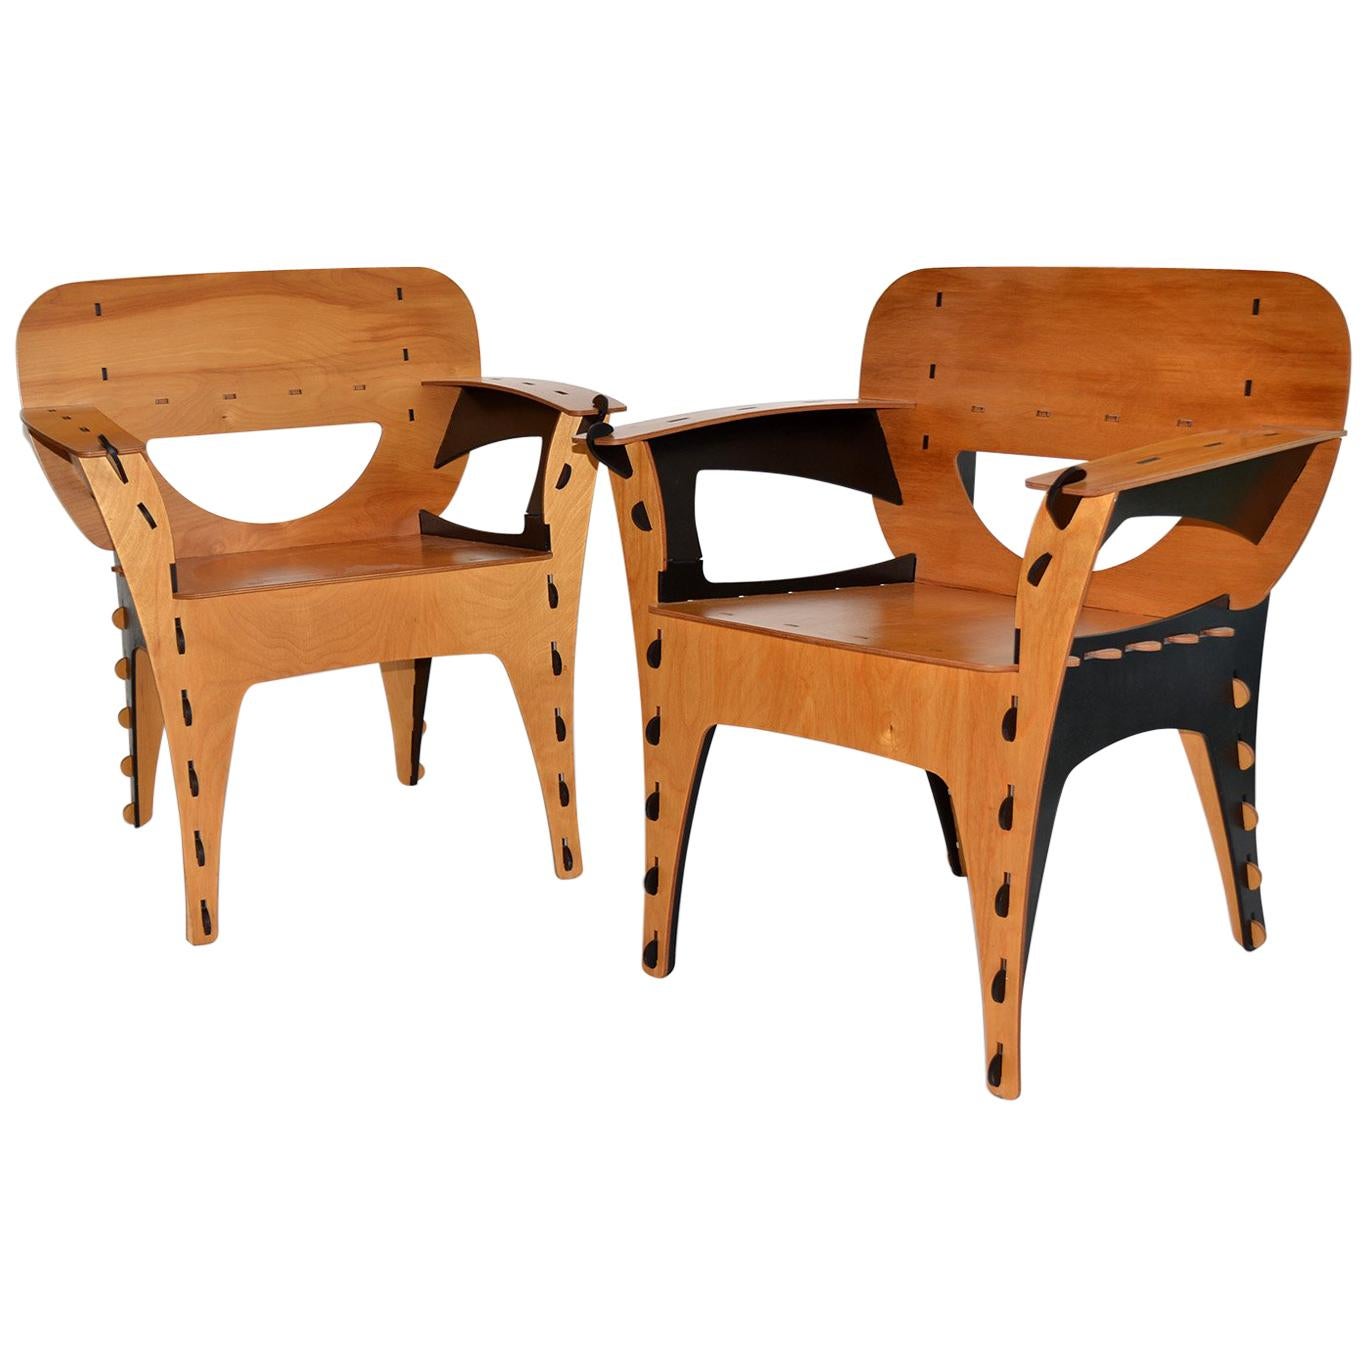 Pair of Plywood Puzzle Chairs by David Kawecki, 1990's